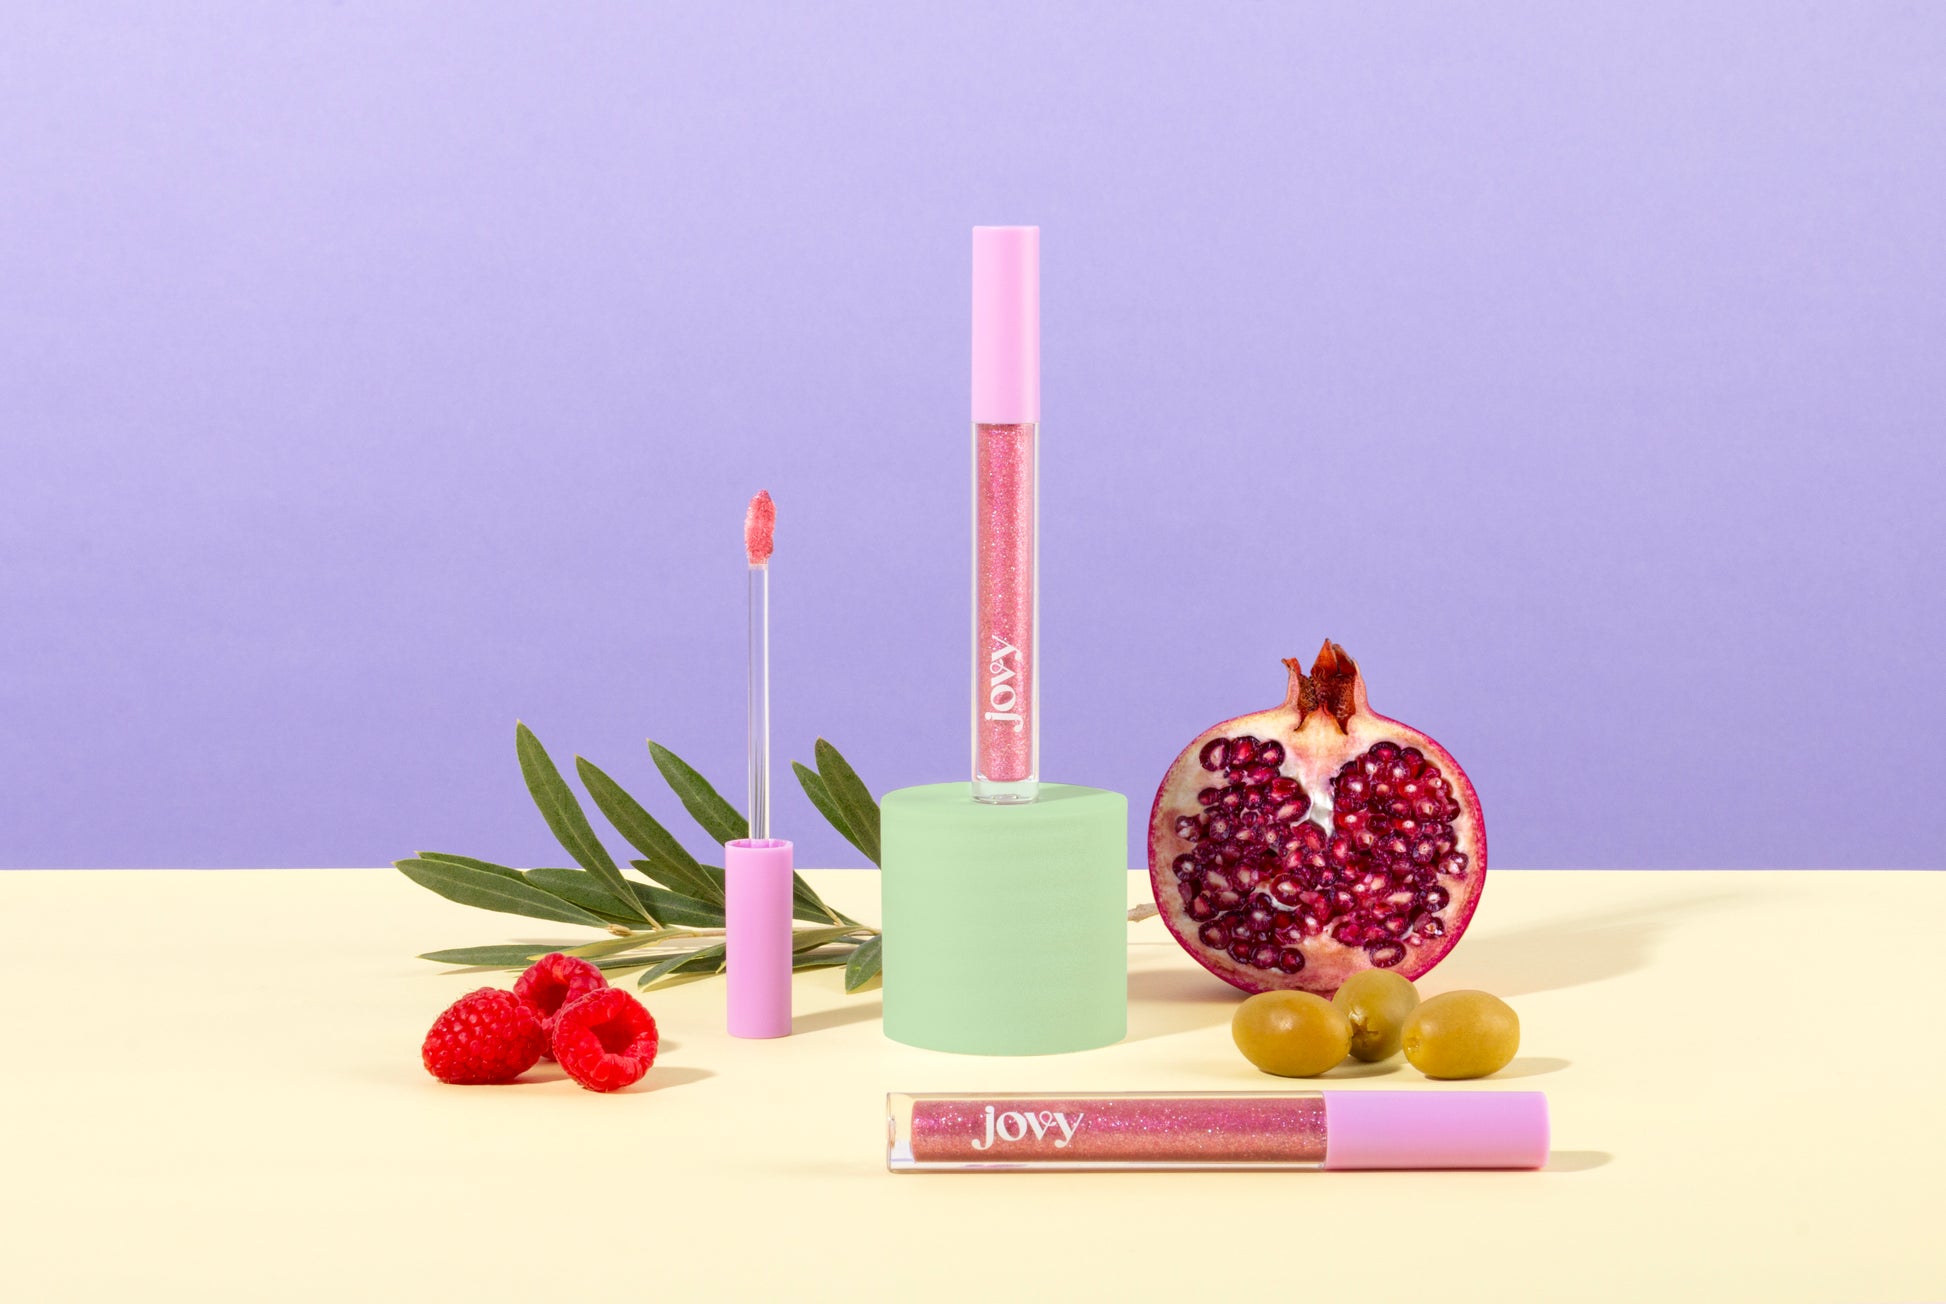 Berry Bliss Play Makeup Kit - JOVY make up products